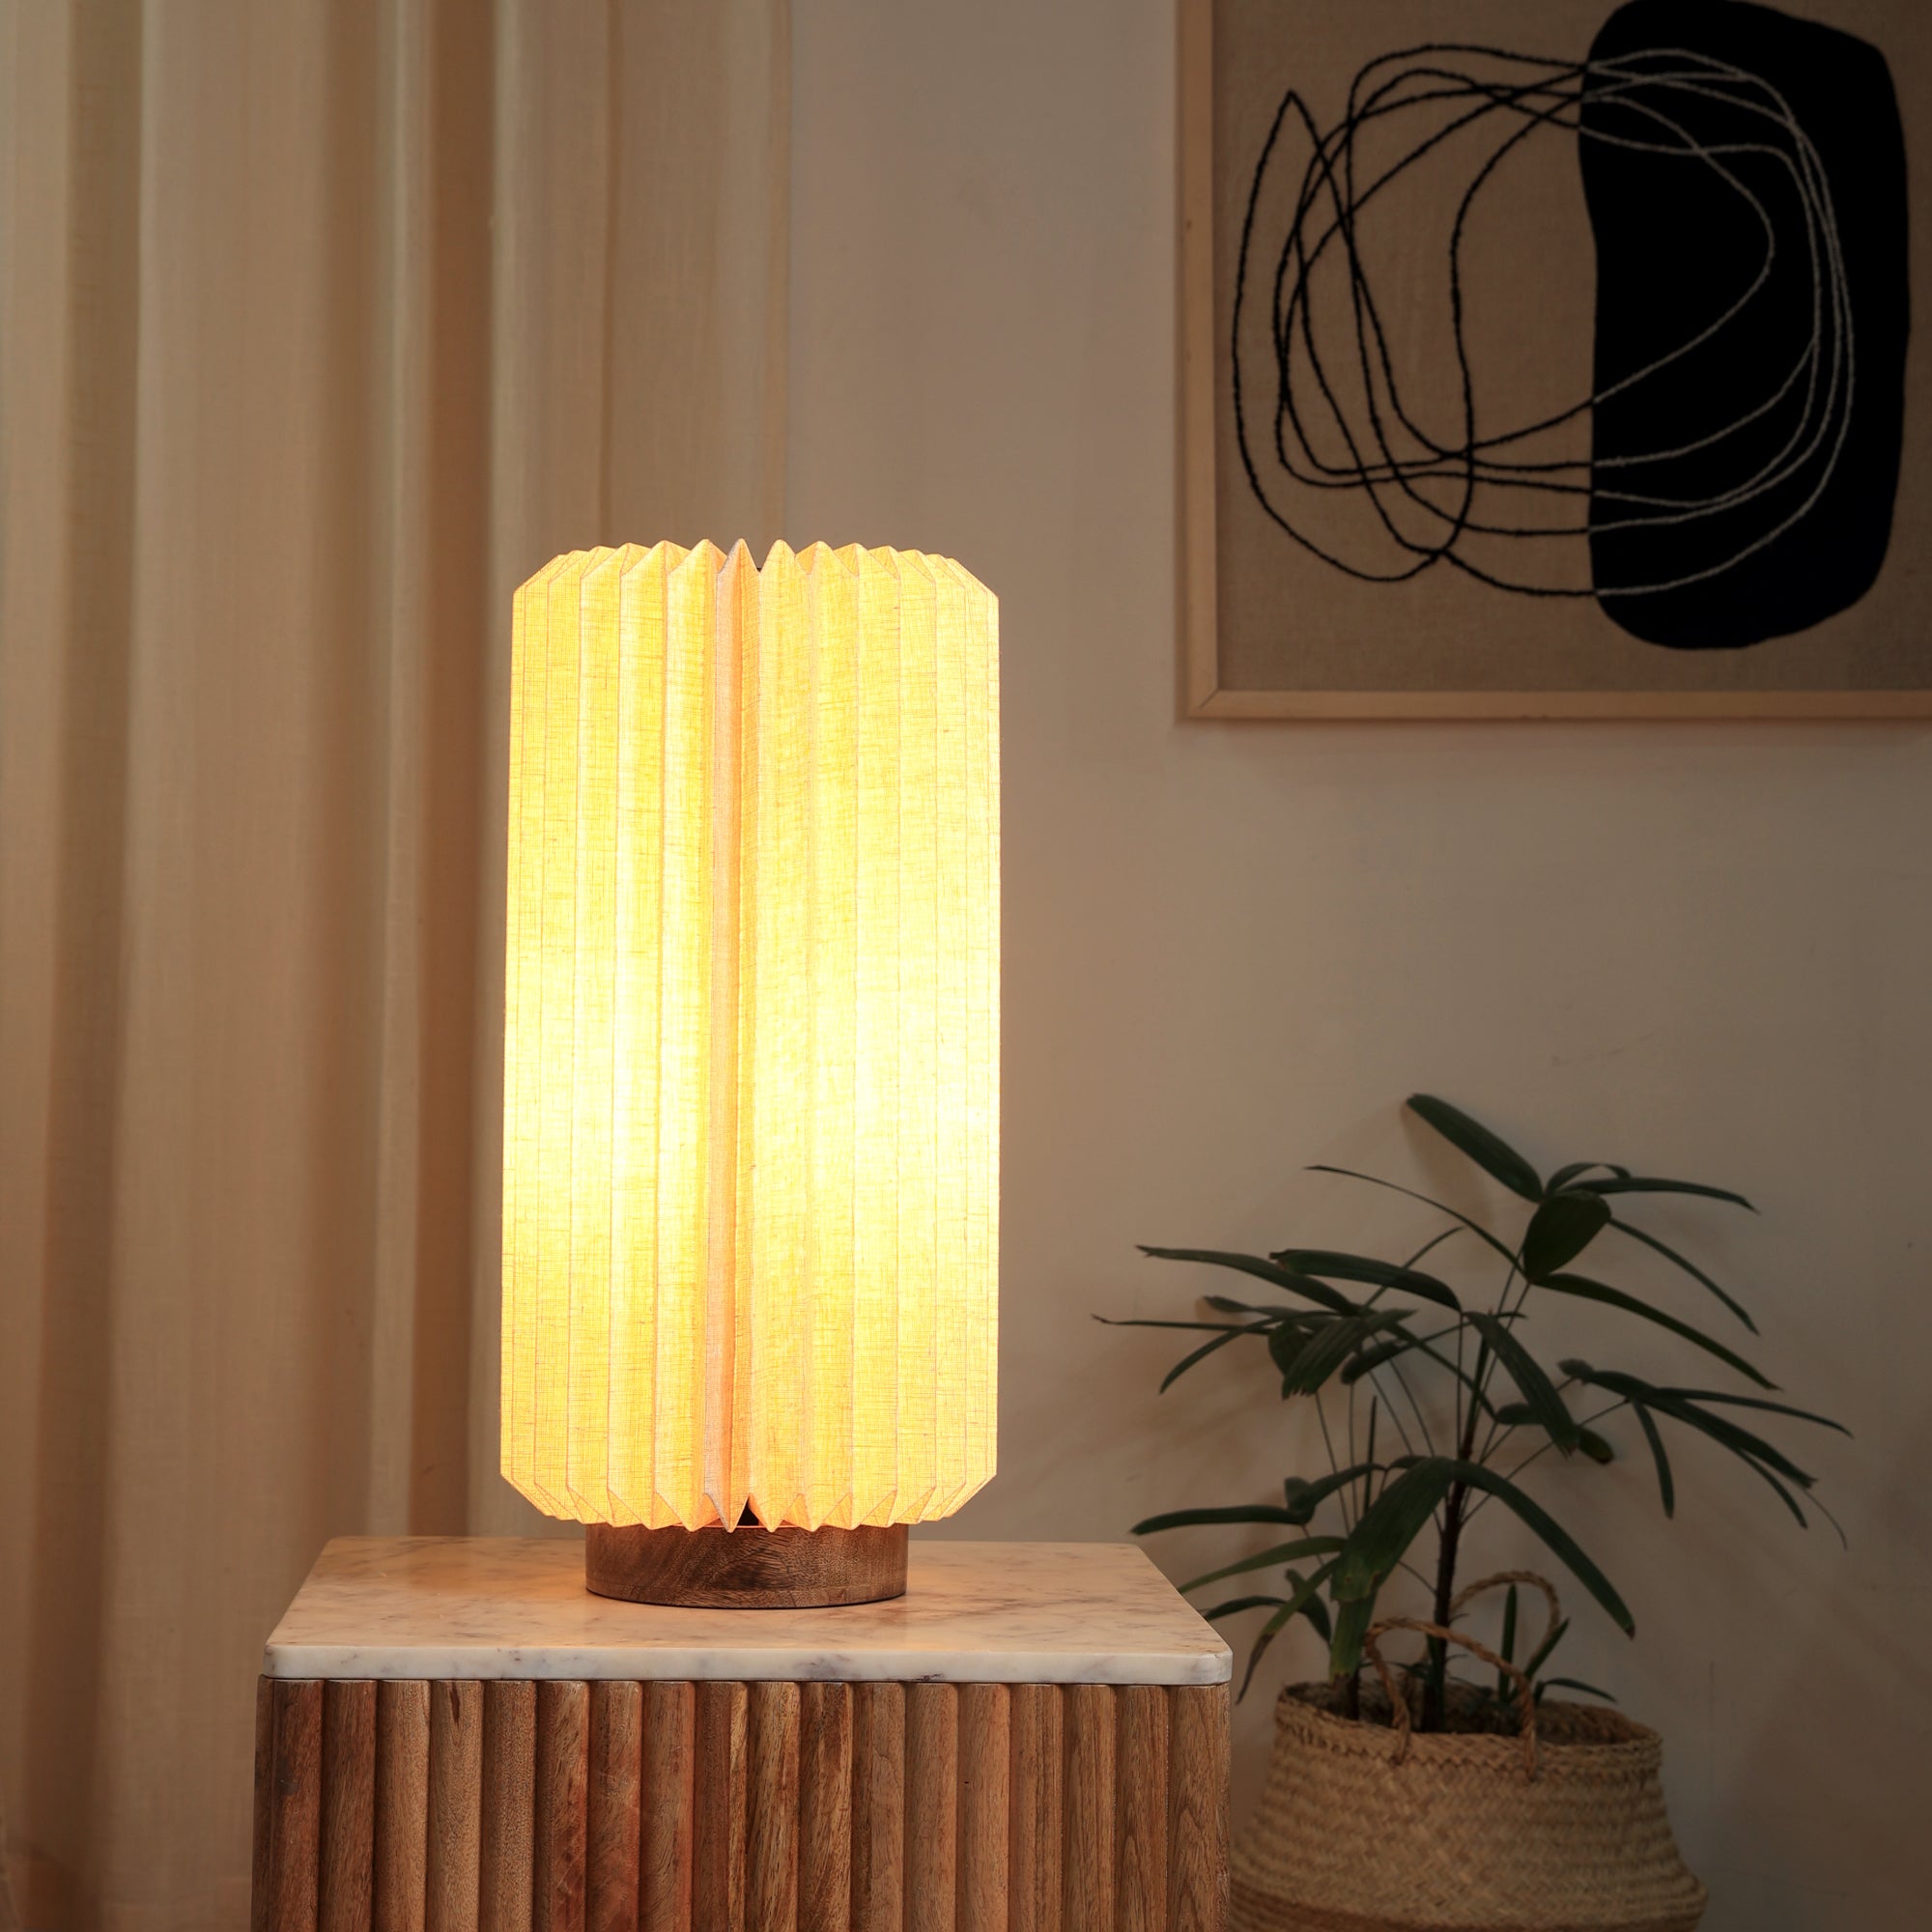 Serenity Table Lamp - Linen Table Lamp with Mango Wood Base